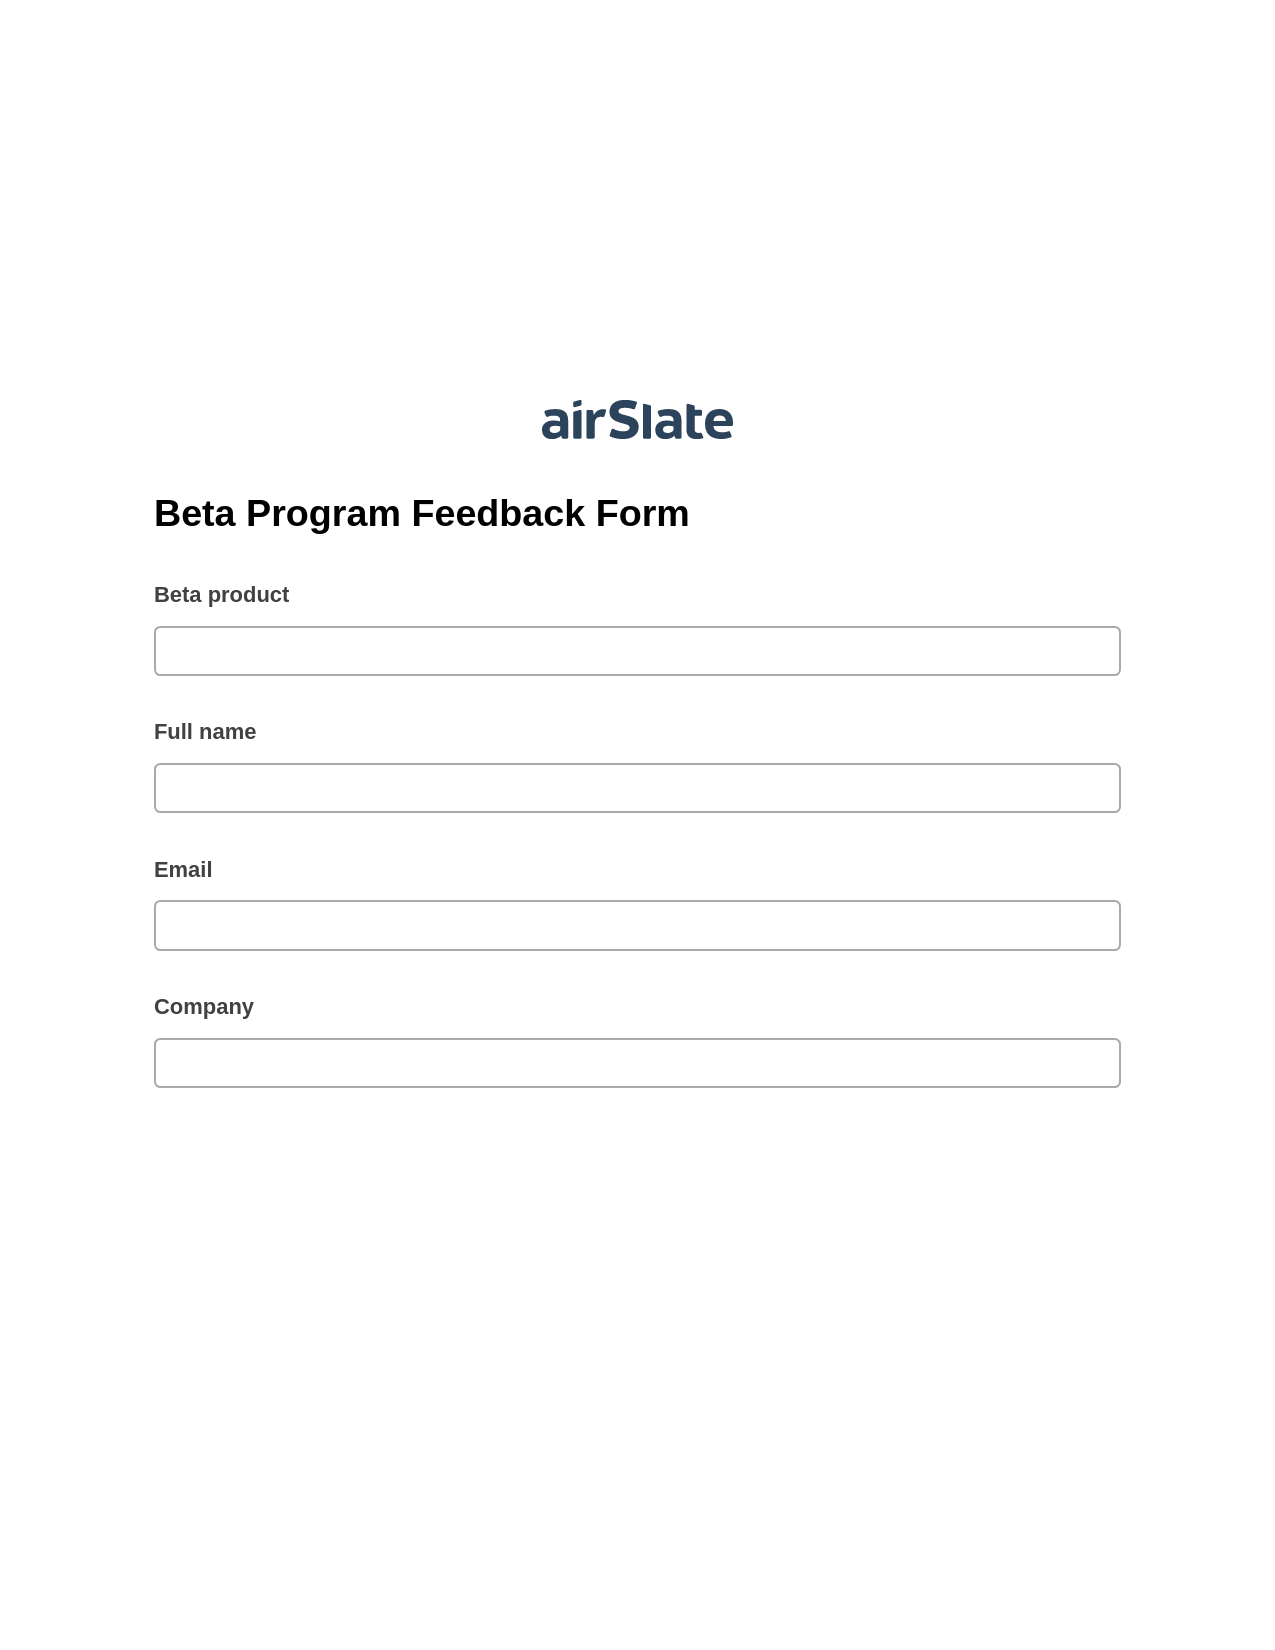 Beta Program Feedback Form Pre-fill from CSV File Bot, Set Signature Type Bot, Export to NetSuite Record Bot